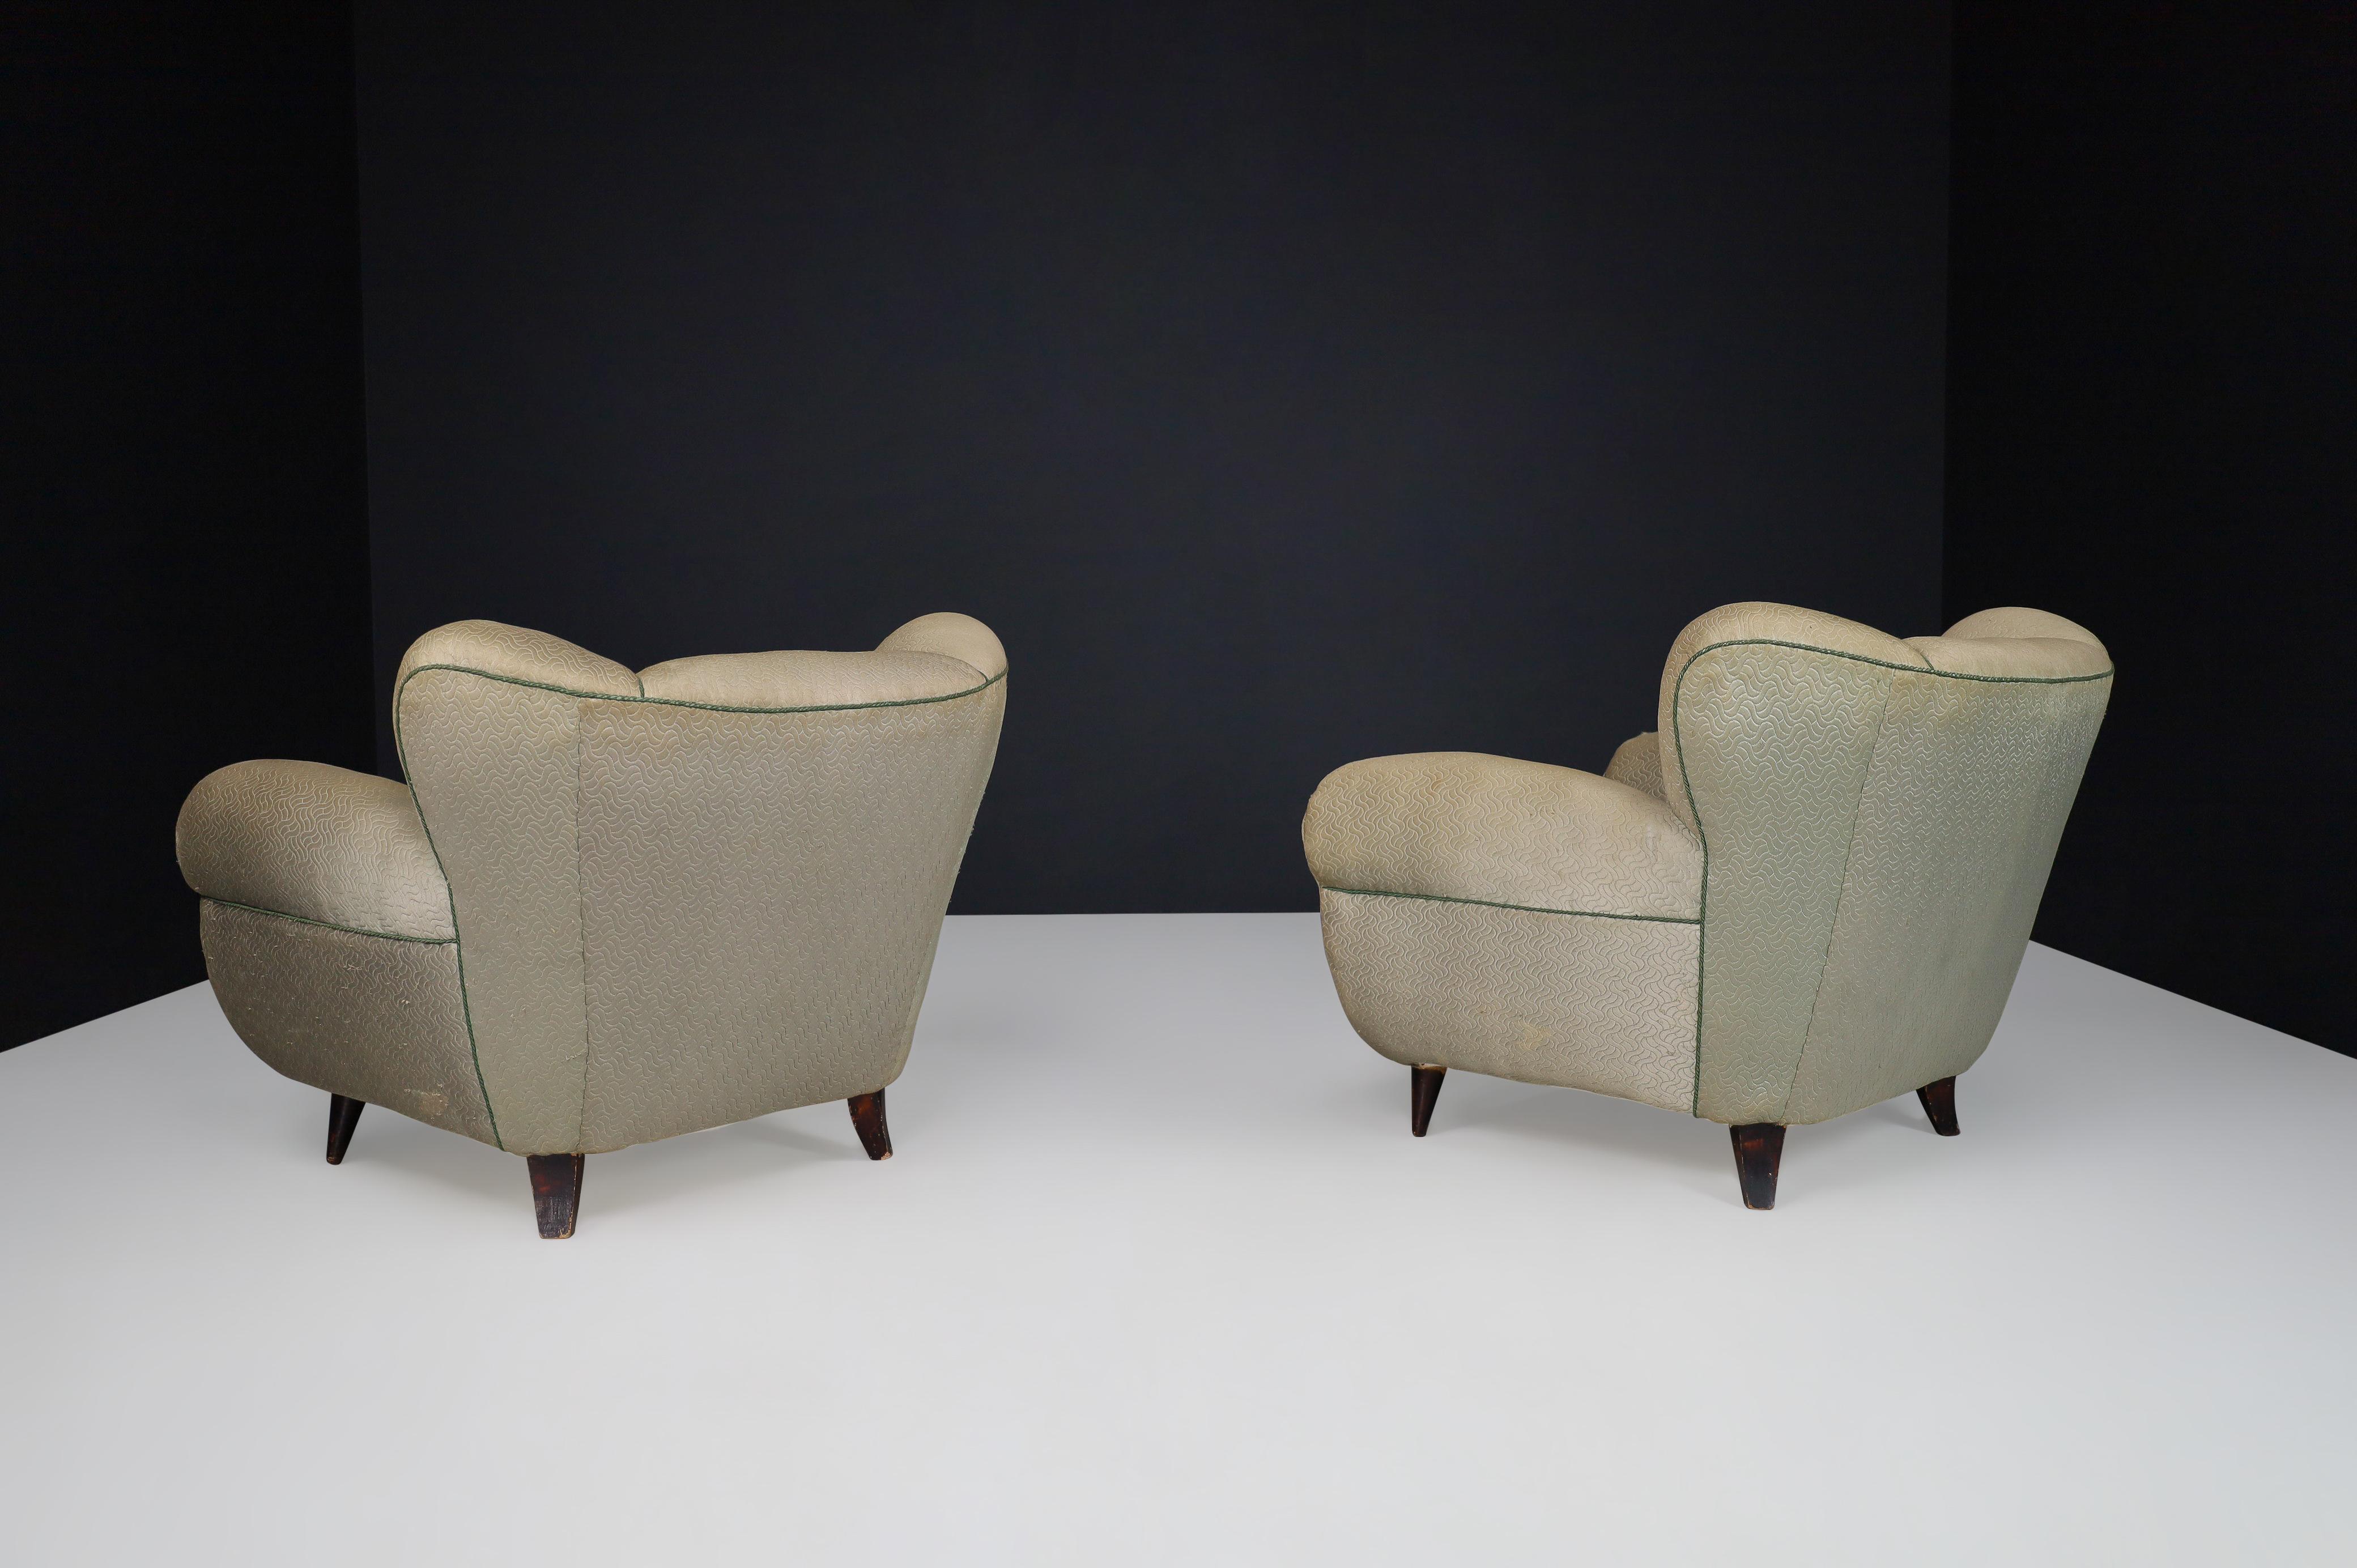 Uglielmo Ulrich Art Deco Lounge Chairs in Original Fabric, Italy 1930s For Sale 6